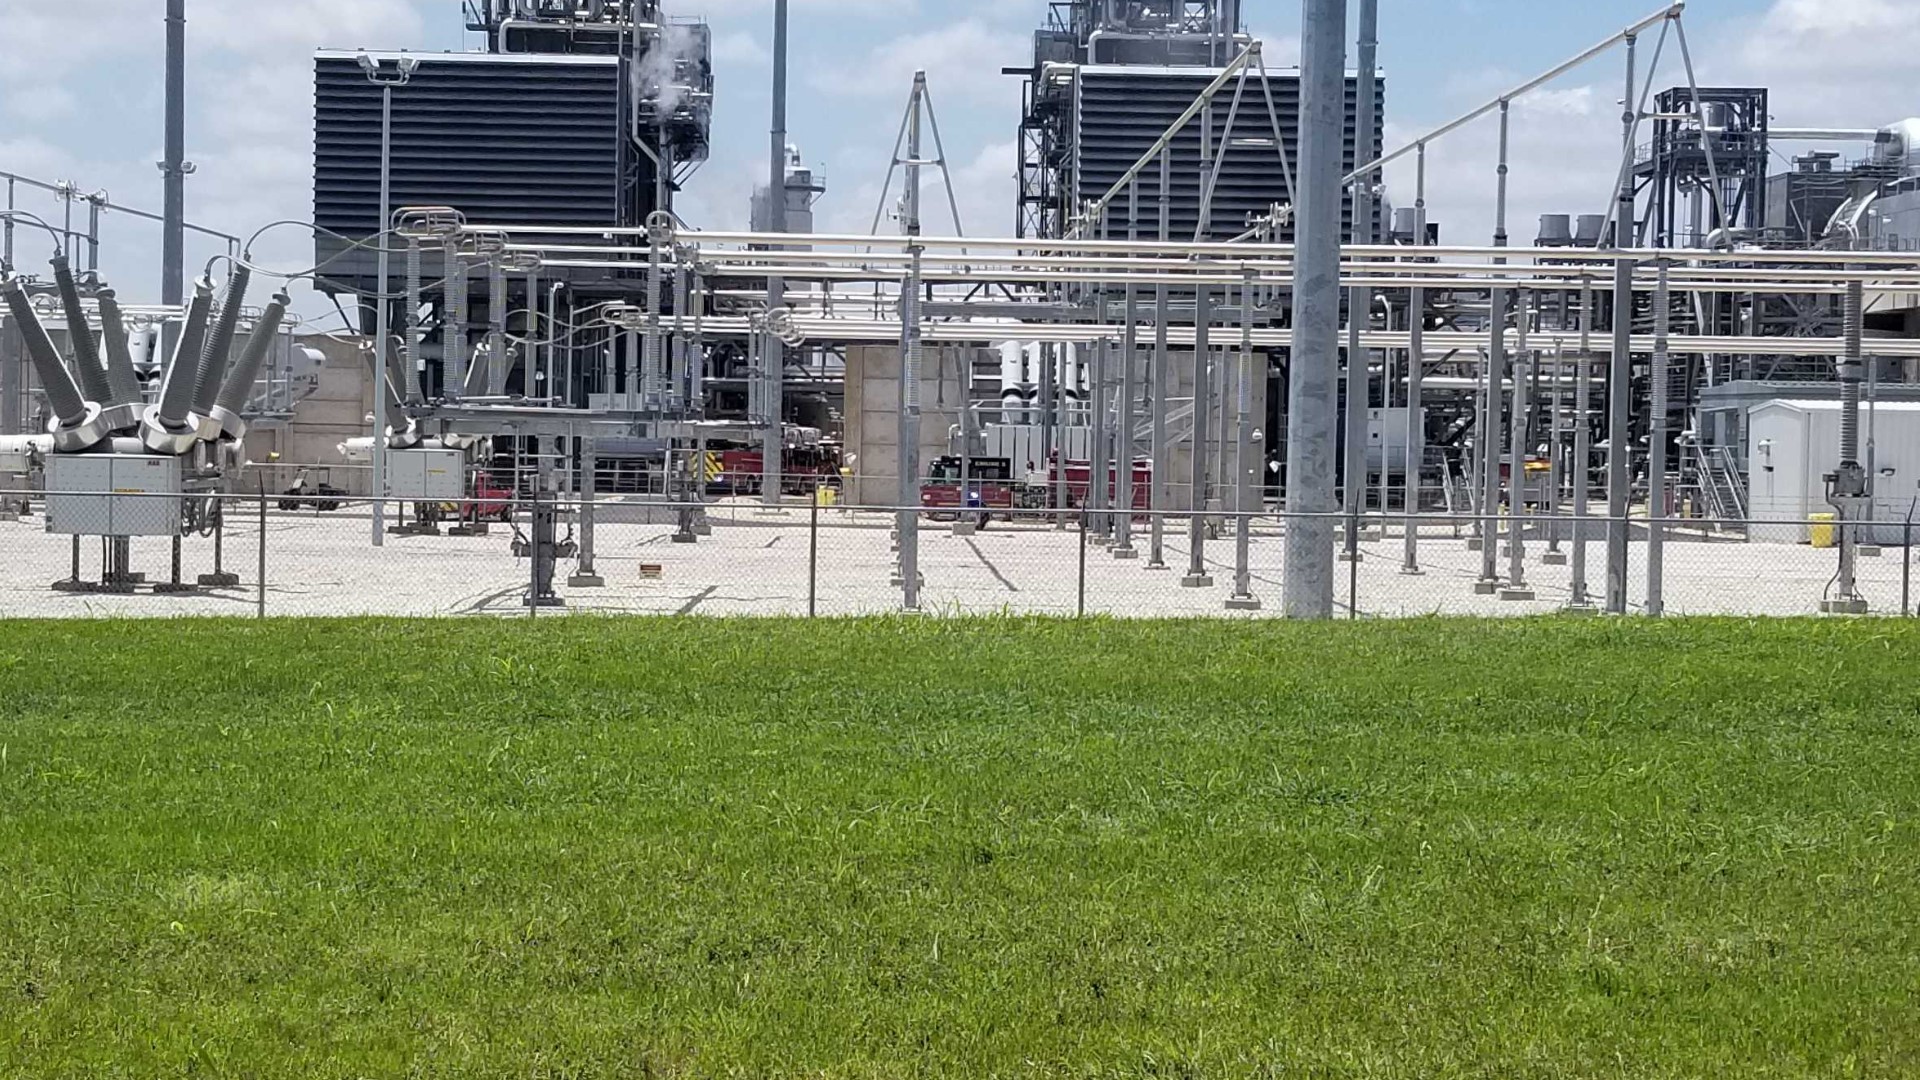 Several Temple fire crews responded to a fire in a natural gas turbine at the Panda Power Plant in East Temple Tuesday afternoon, Temple Fire Department Training Chief Johnathan Christian said.